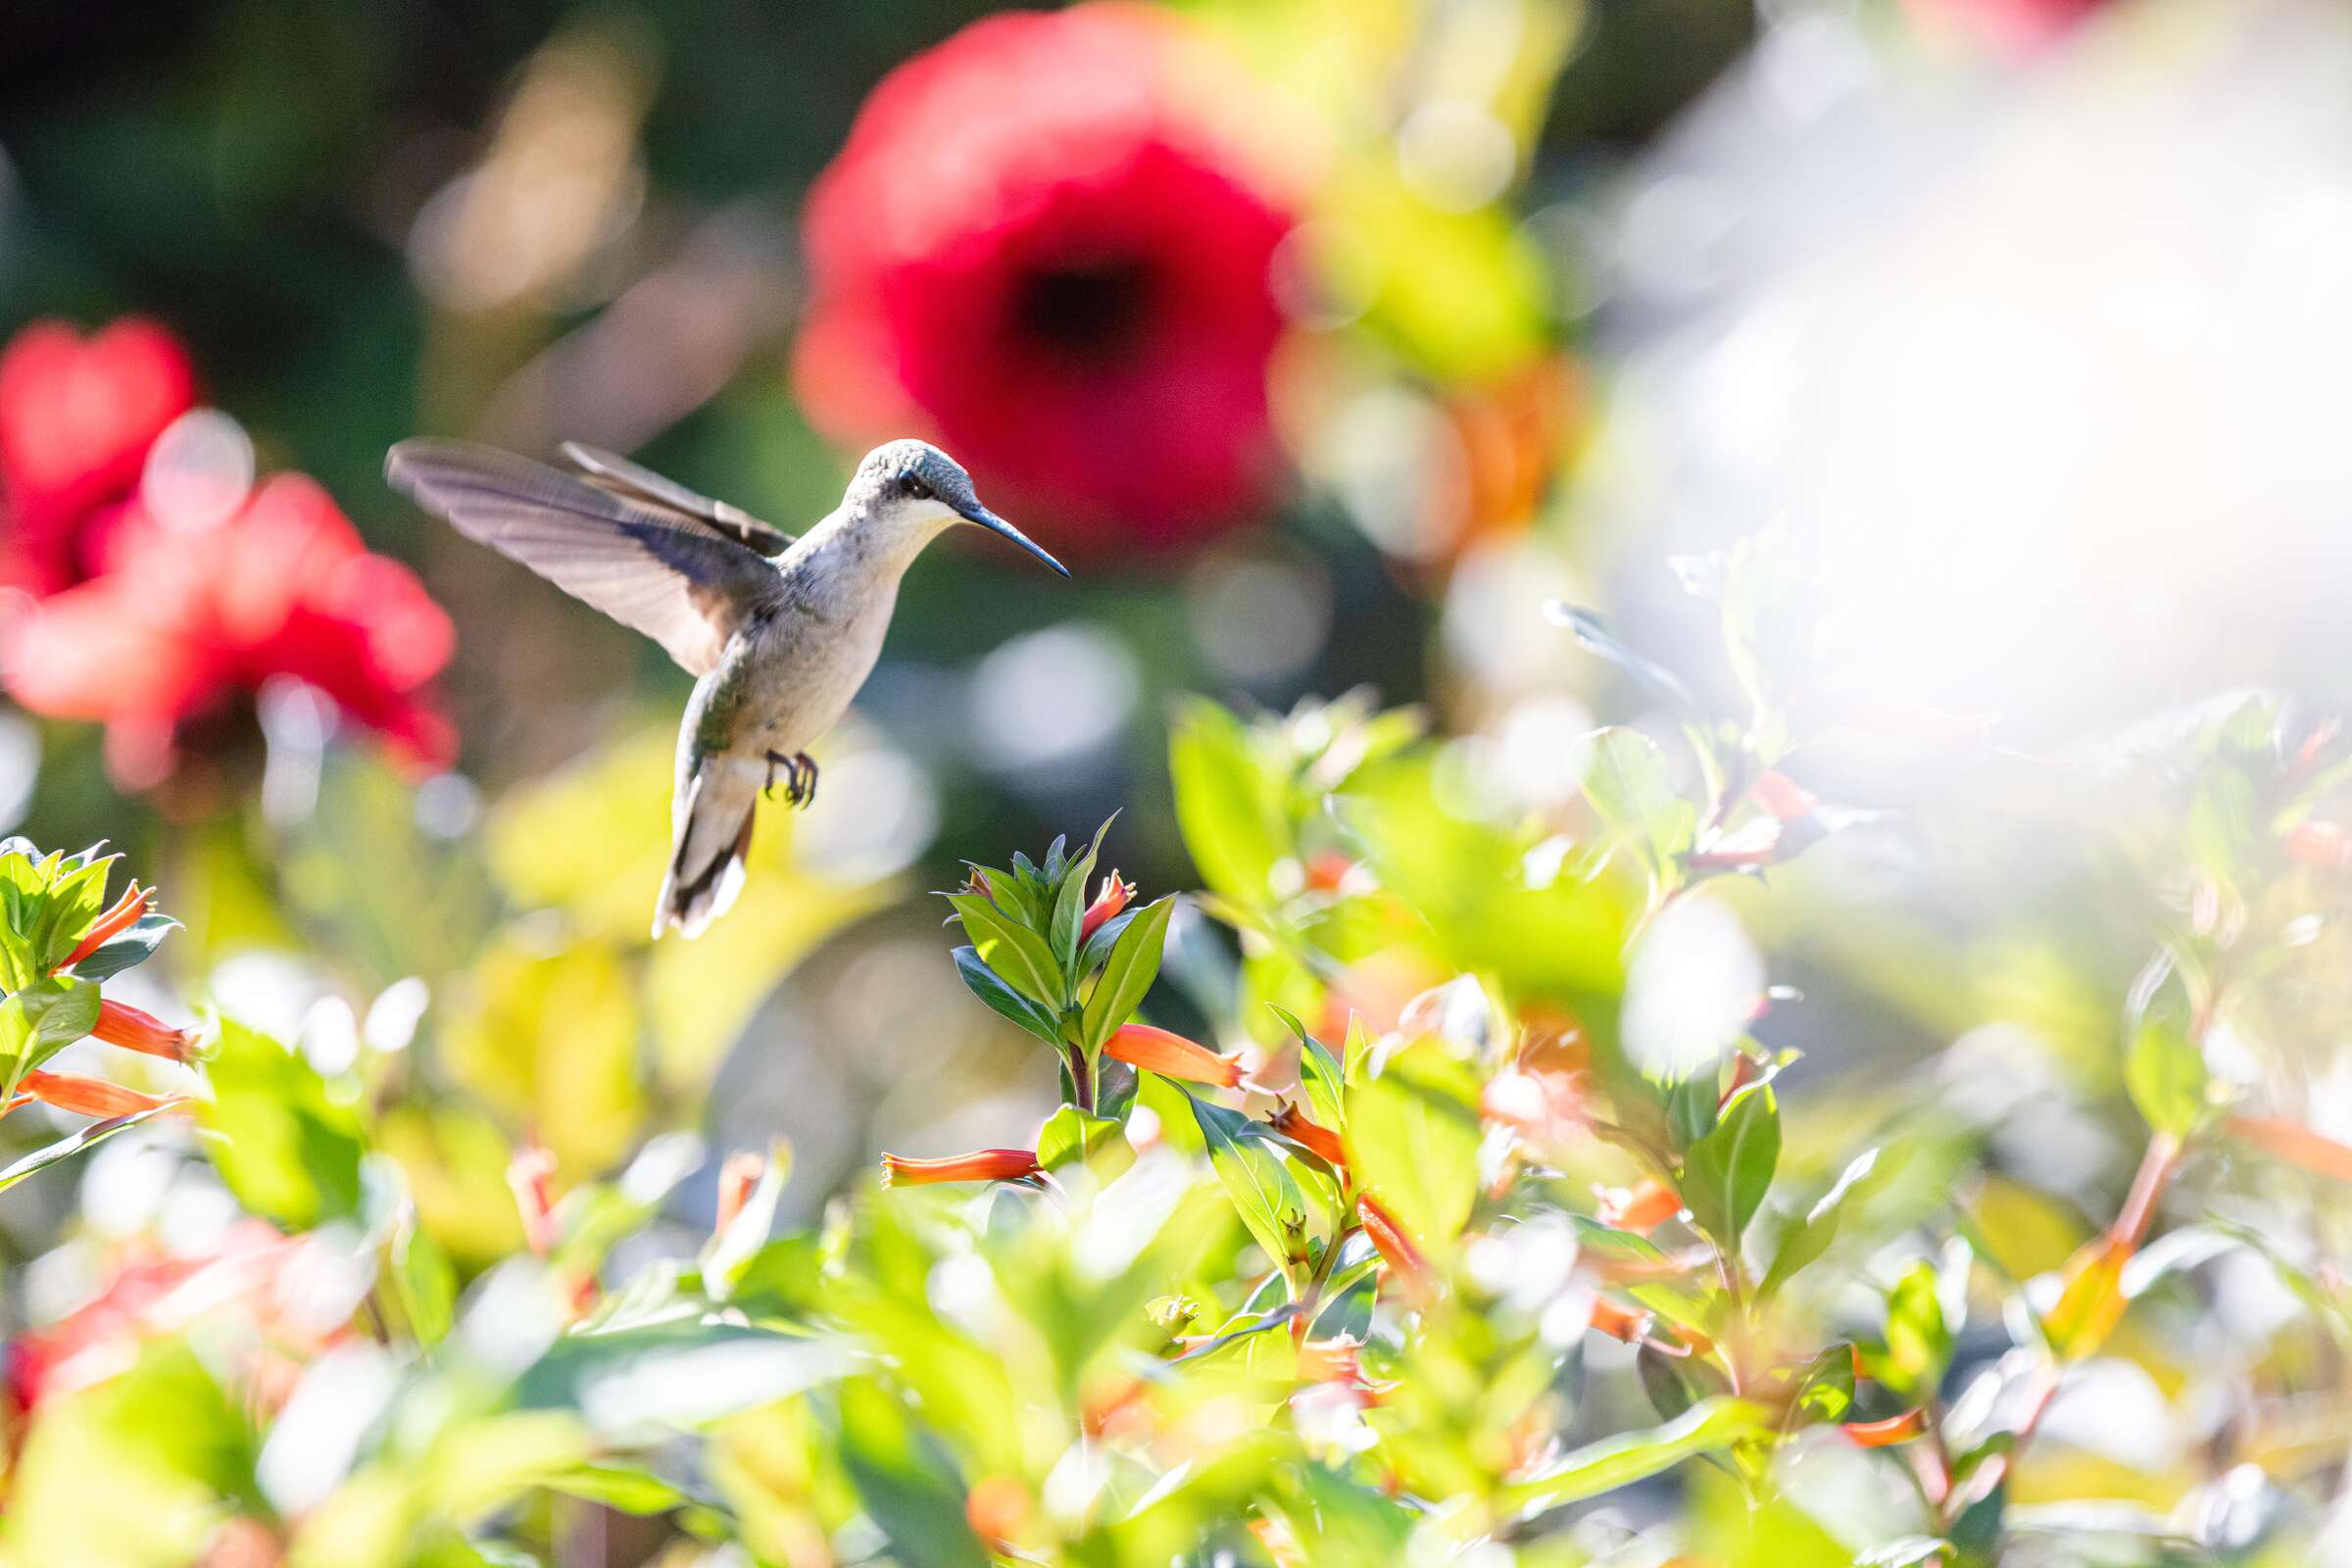 A hummingbird hovers above tubular orange flowers, large red flowers visible in the background